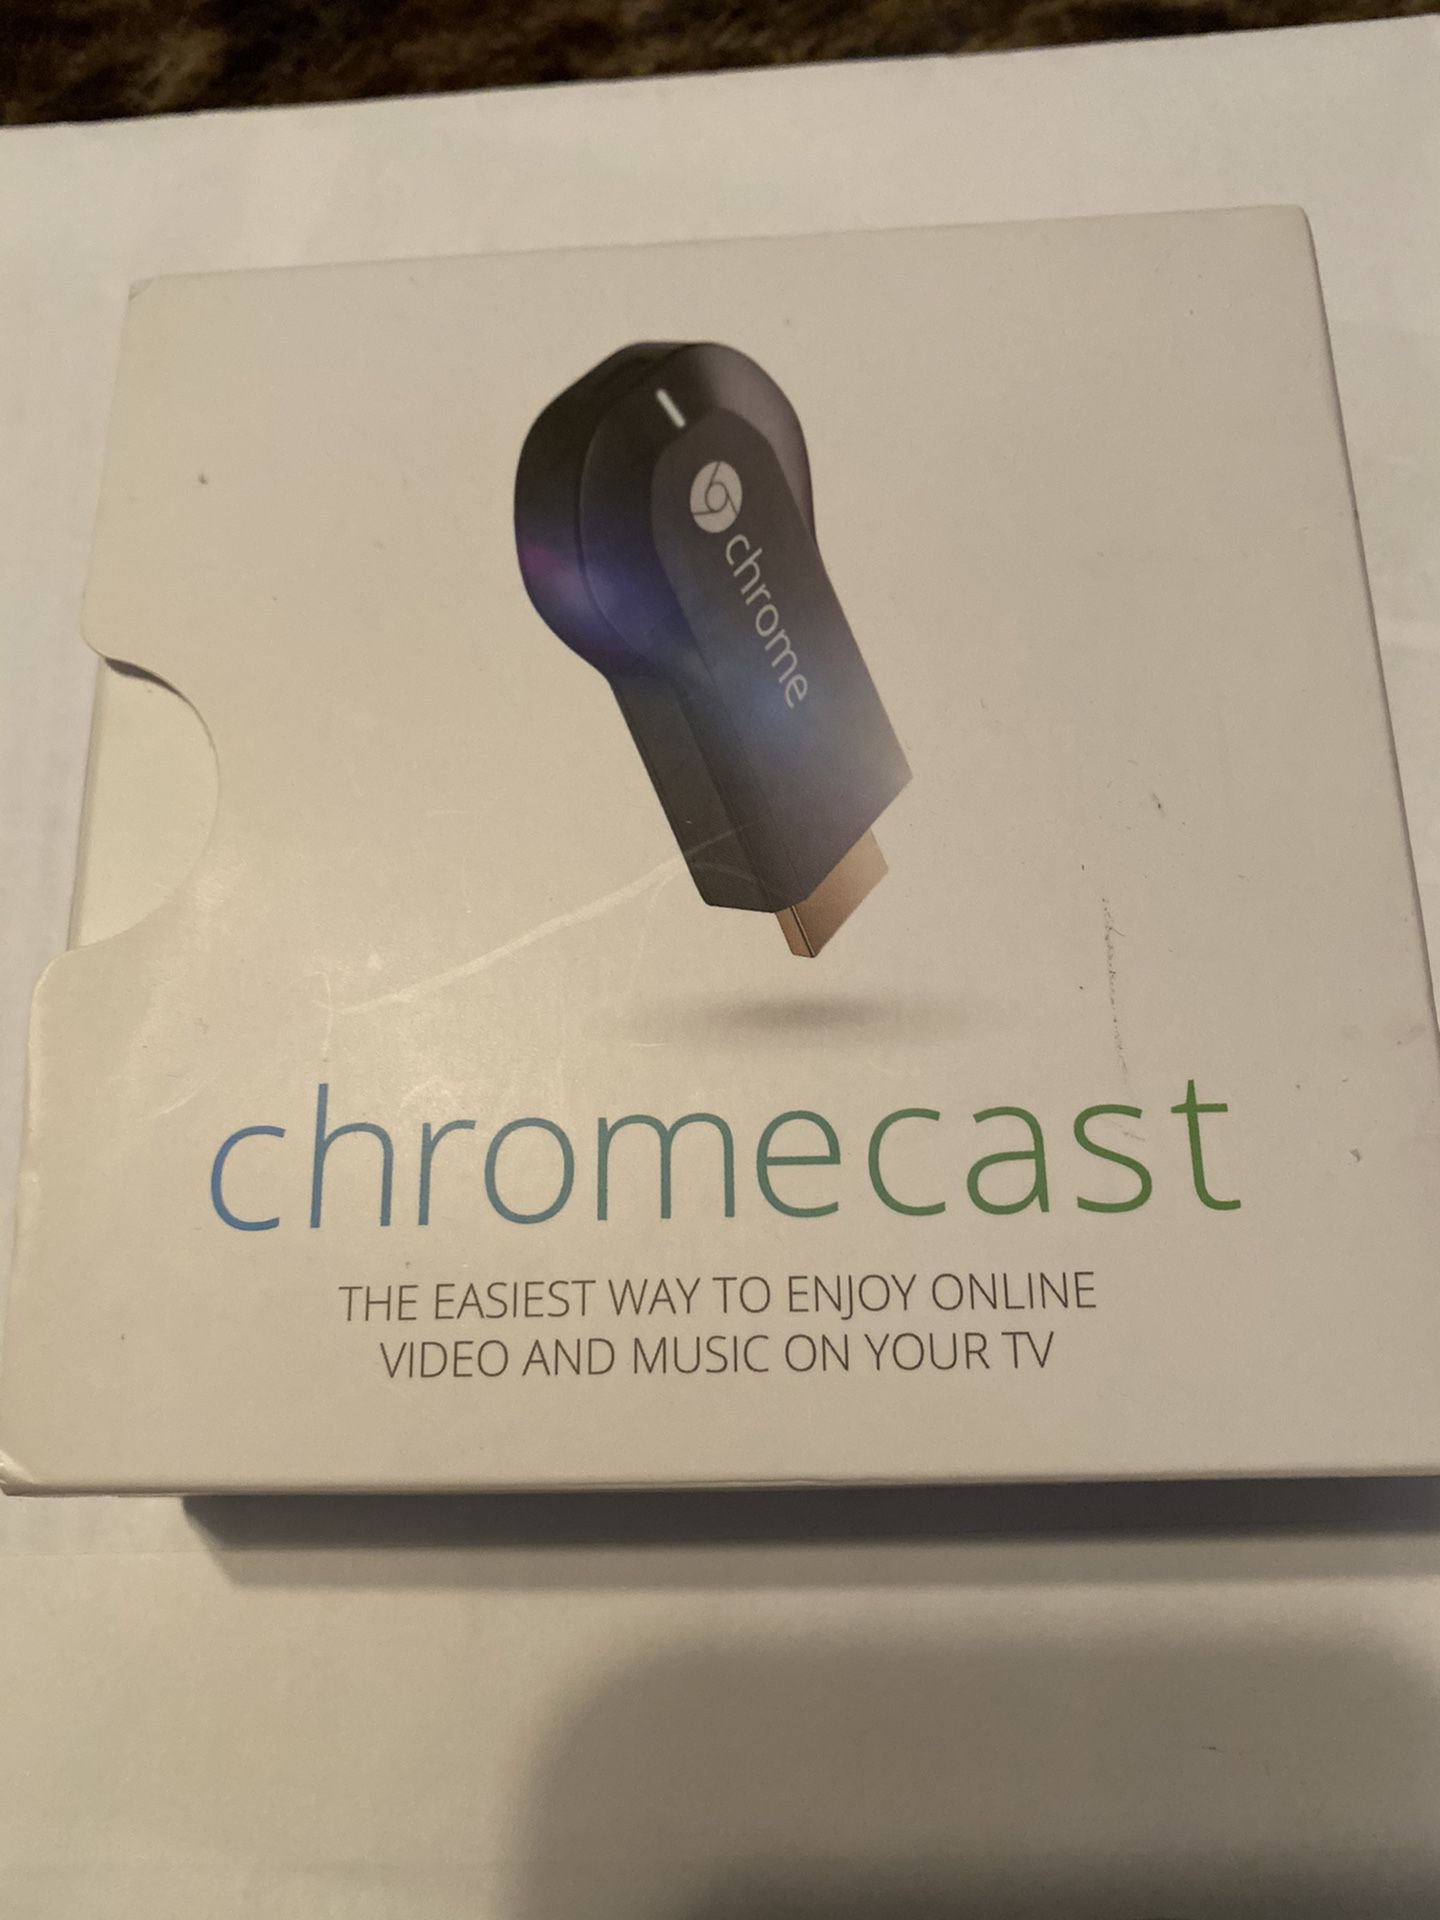 Chromecast first edition New (open box)